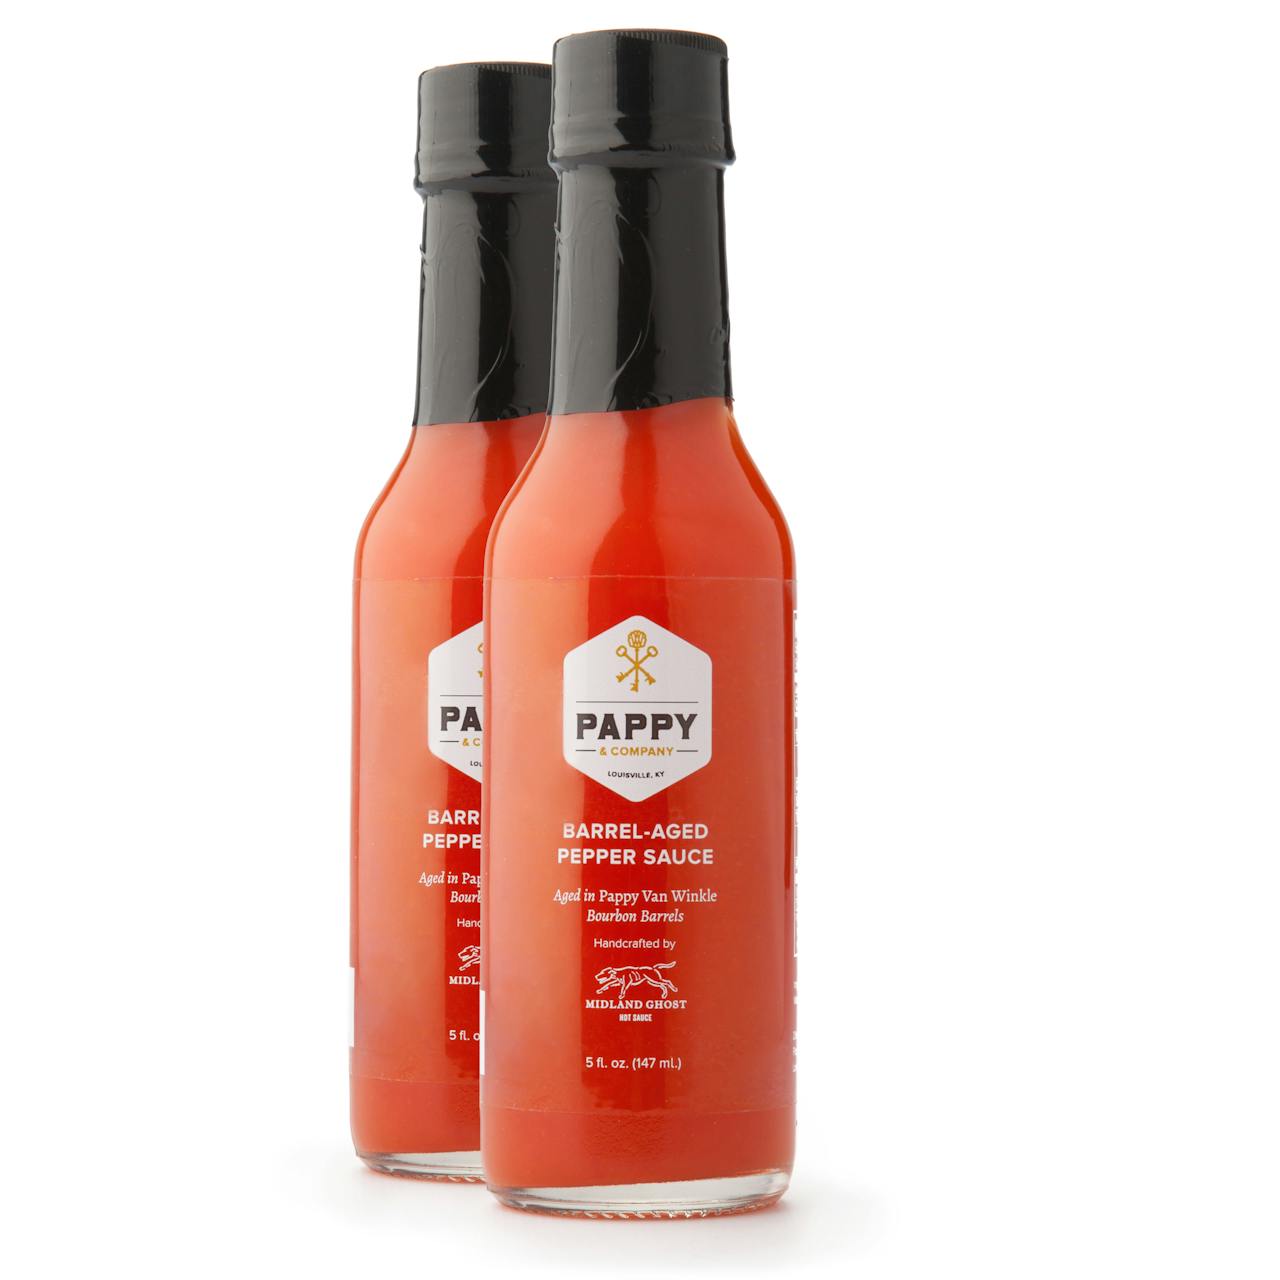 Pappy & Company Pappy Barrel-Aged Pepper Sauce (2 pack)